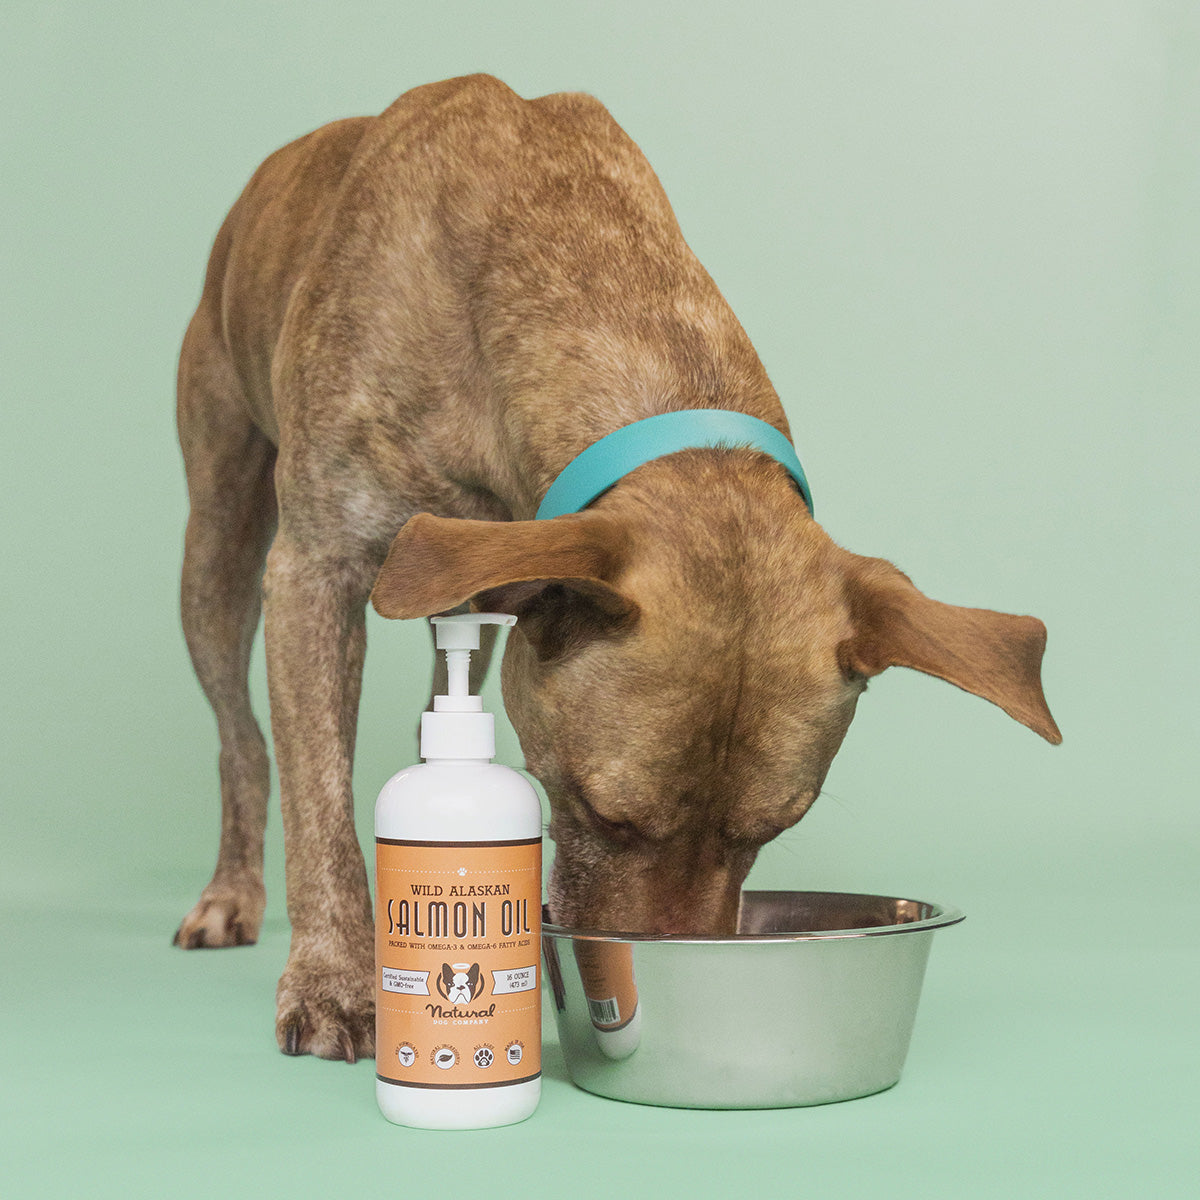 Pit bull eats from silver bowl containing Natural Dog Company Wild Alaskan Salmon Oil